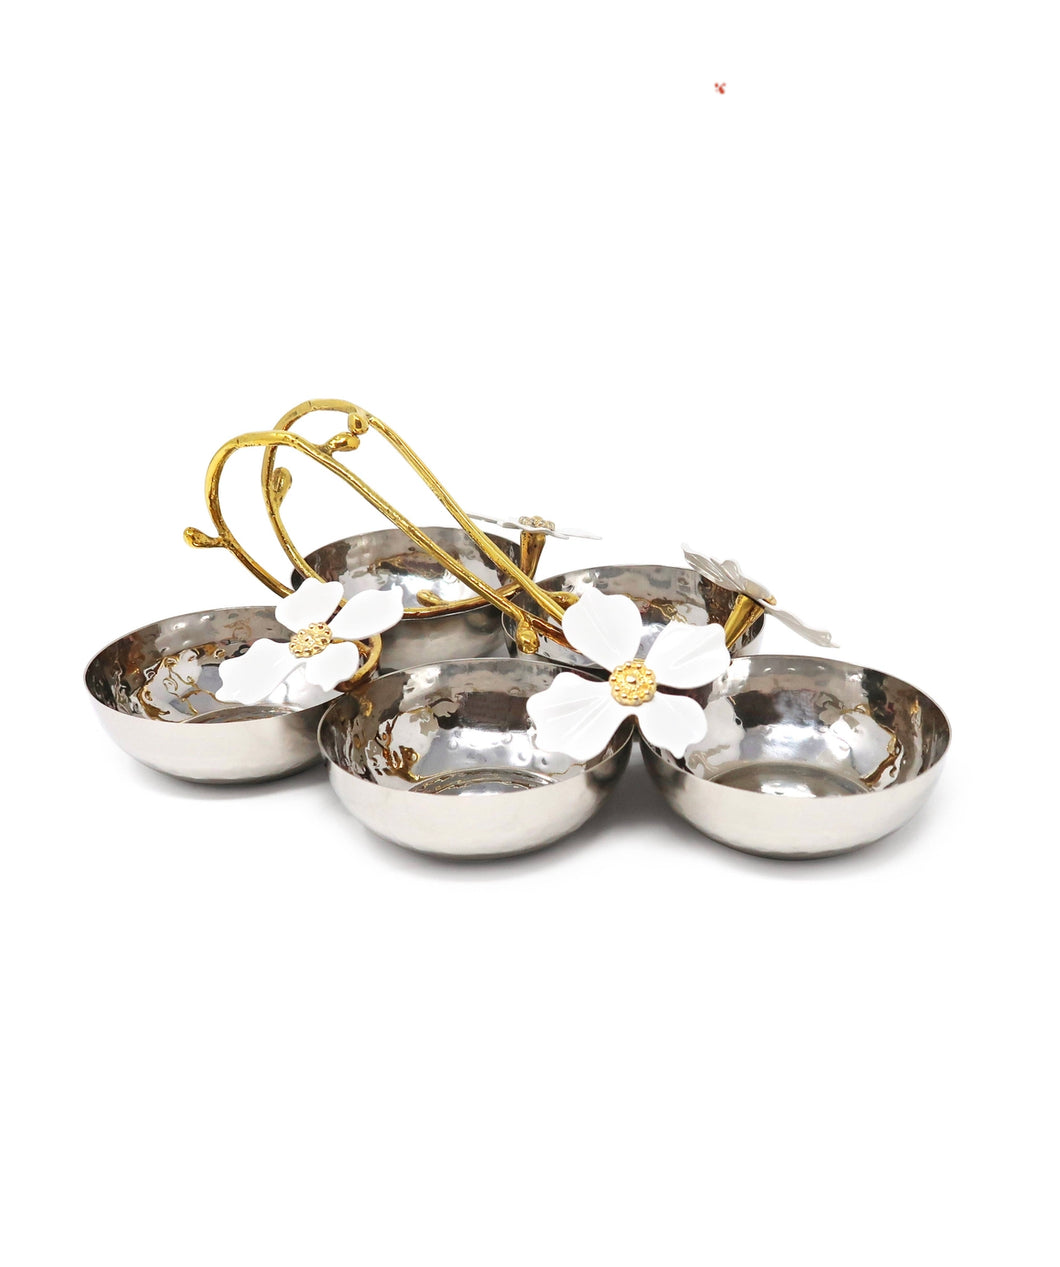 Stainless Steel 5 Bowl Relish Dish with Jewel Flower Design